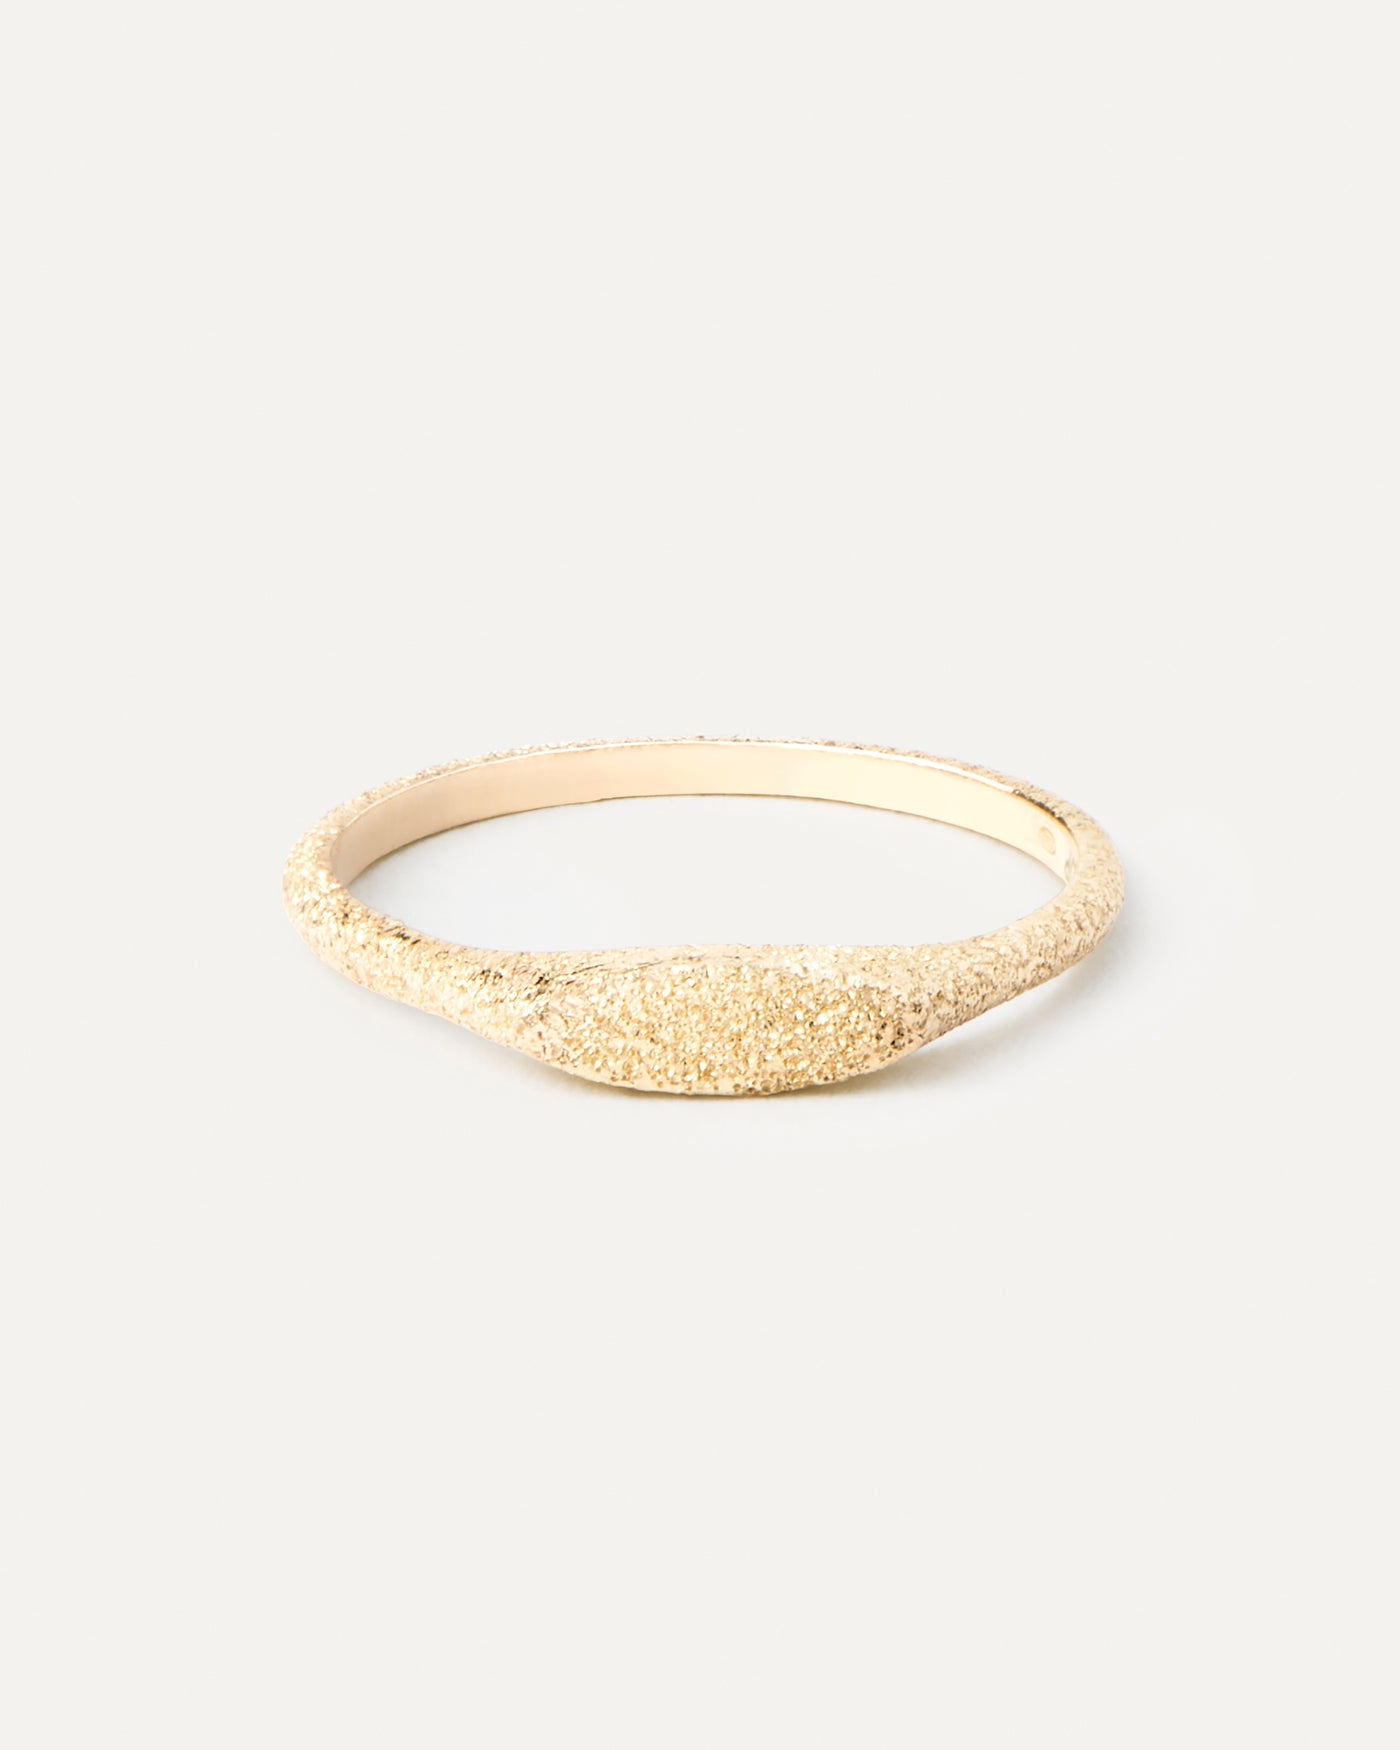 2023 Selection | Sandblasted Gold Cleo Stamp Ring. Slim signet ring in solid 18K yellow gold with a sandblast finish. Get the latest arrival from PDPAOLA. Place your order safely and get this Best Seller. Free Shipping.